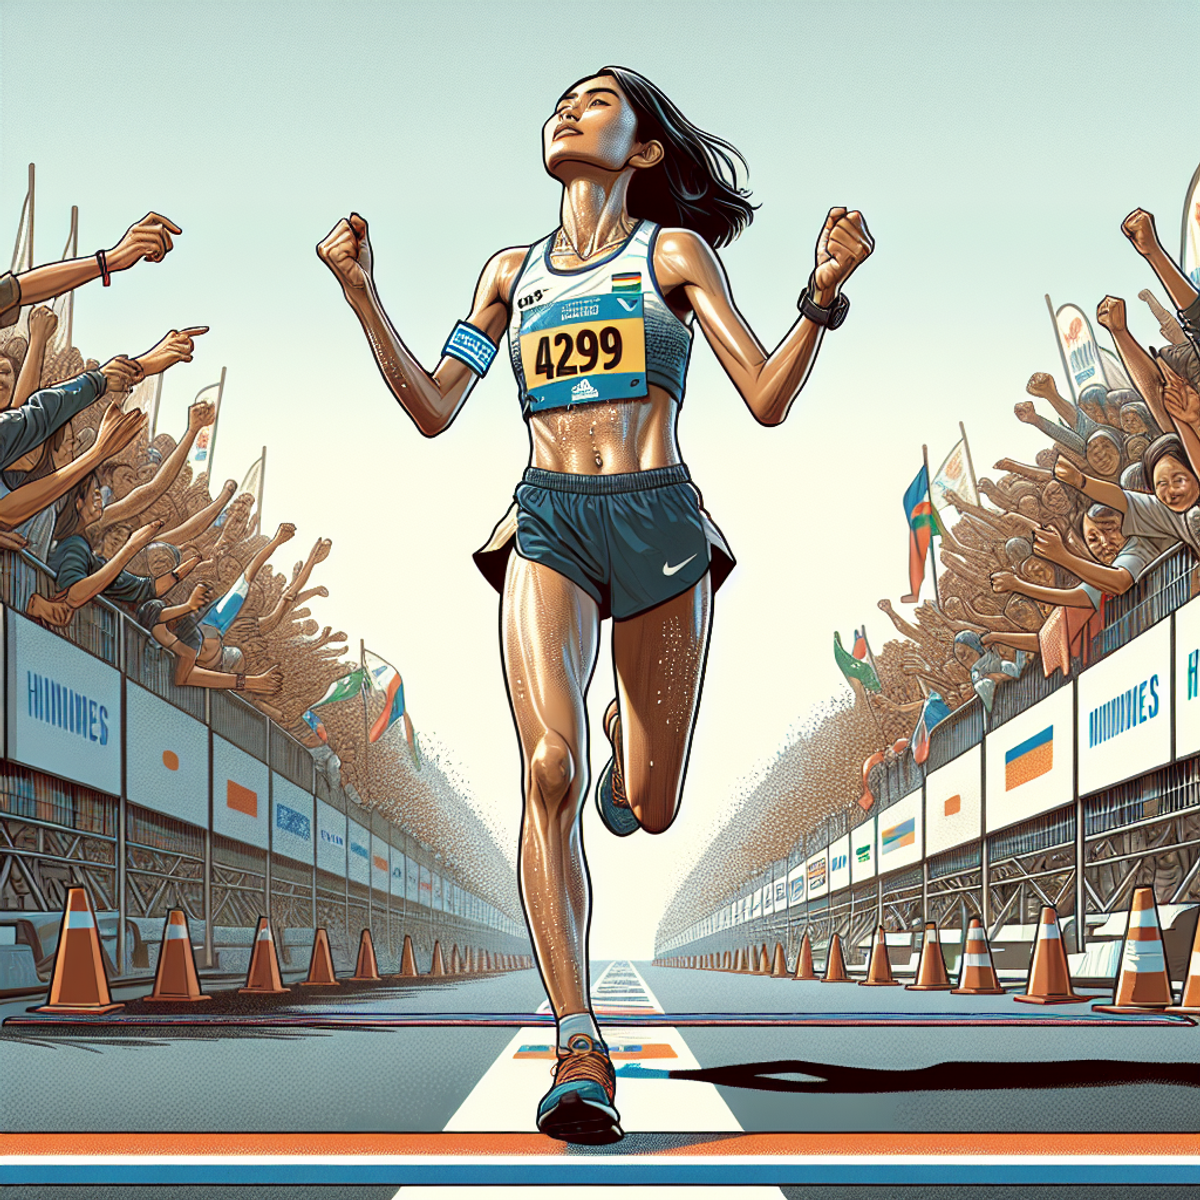 A South Asian female marathon runner crossing the finish line.